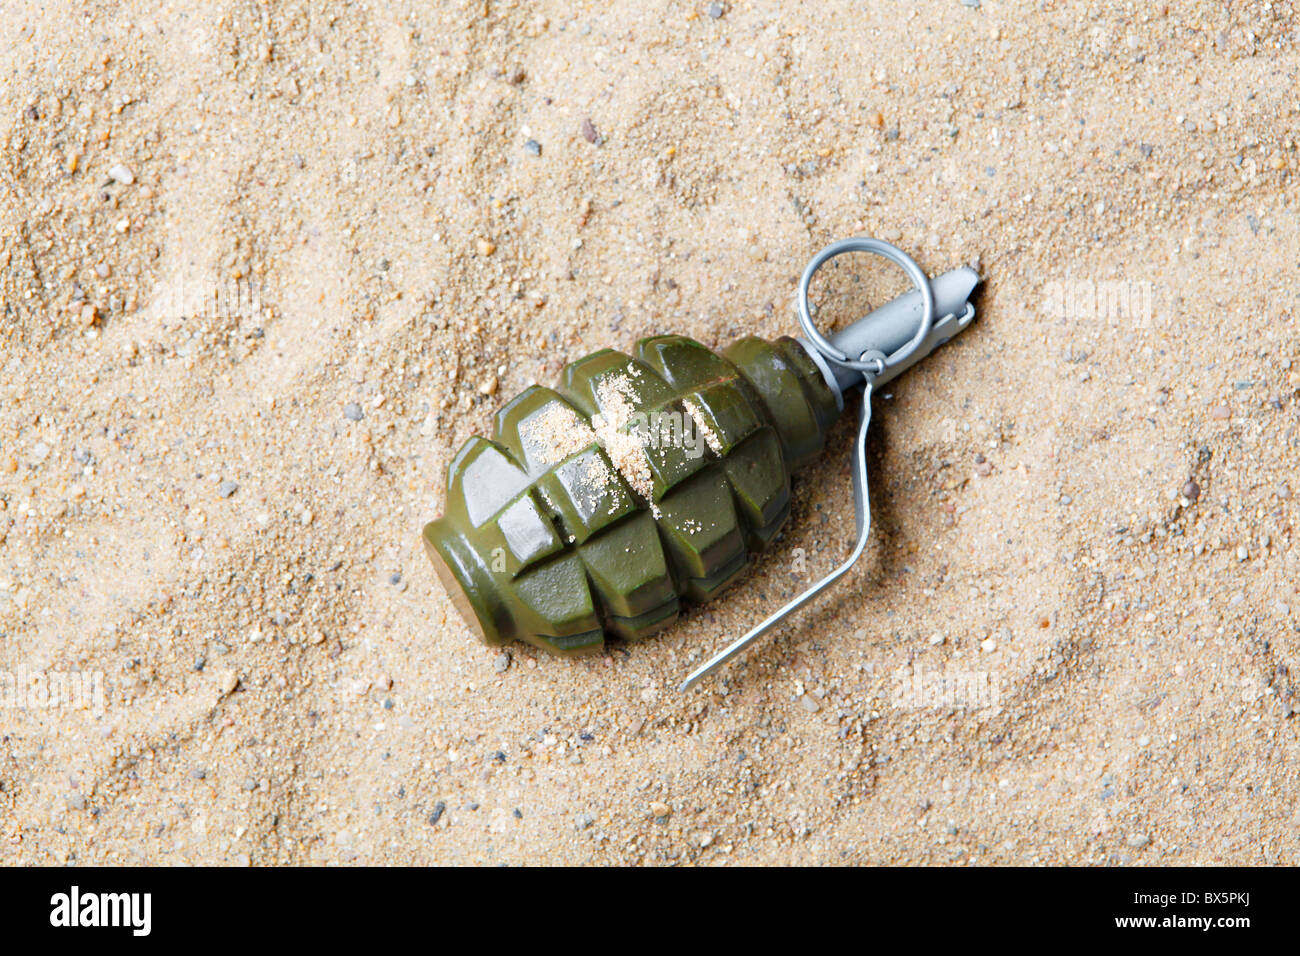 A Handgrenade on a sand, deadly weapon, dangerous. (CTK Photo/Josef Horazny) Stock Photo